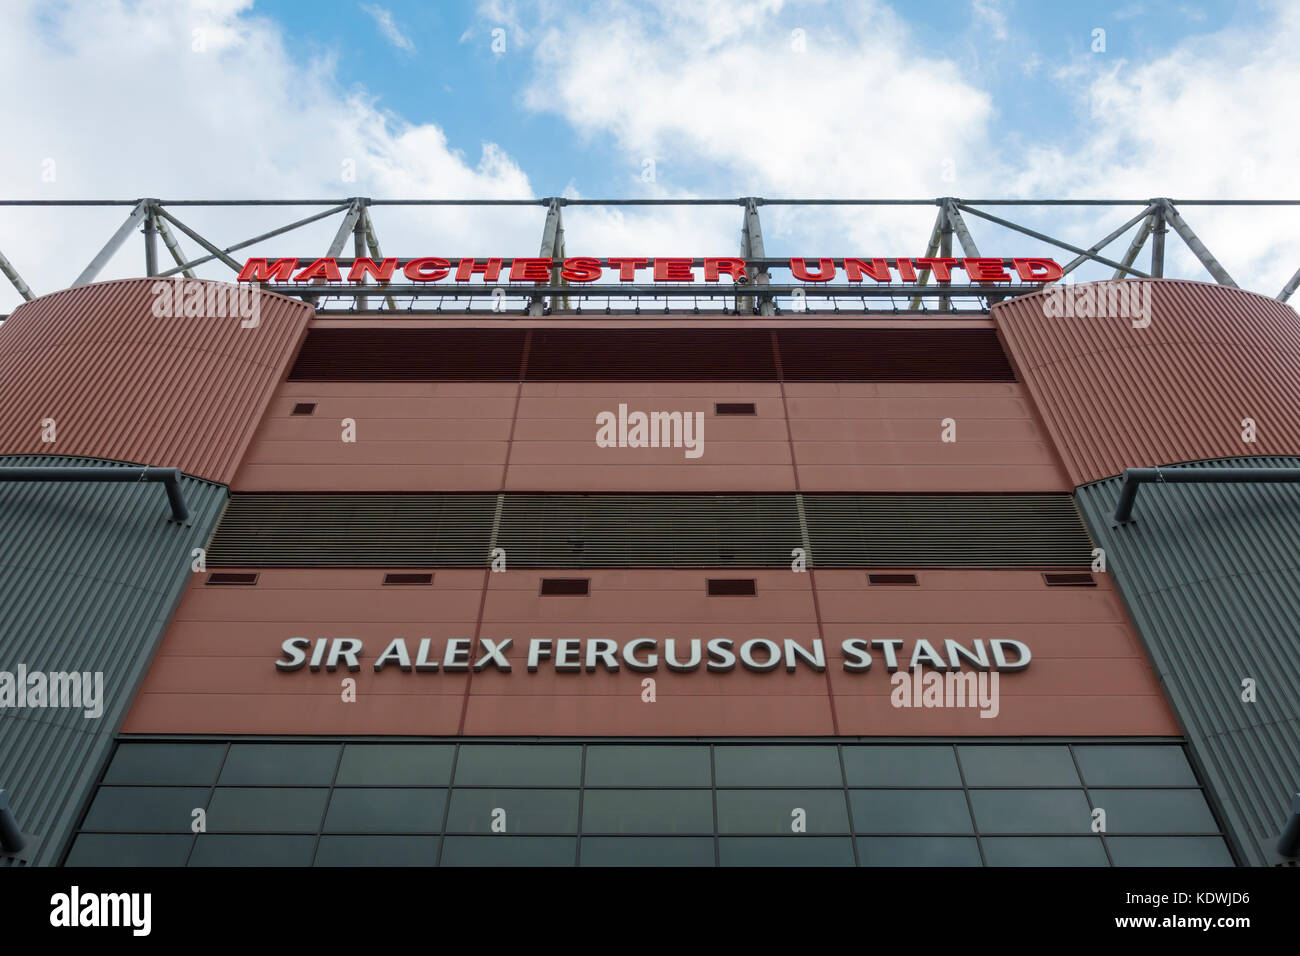 The Sir Alex Ferguson Stand at Old Trafford. Home of Manchester United Football Club Stock Photo